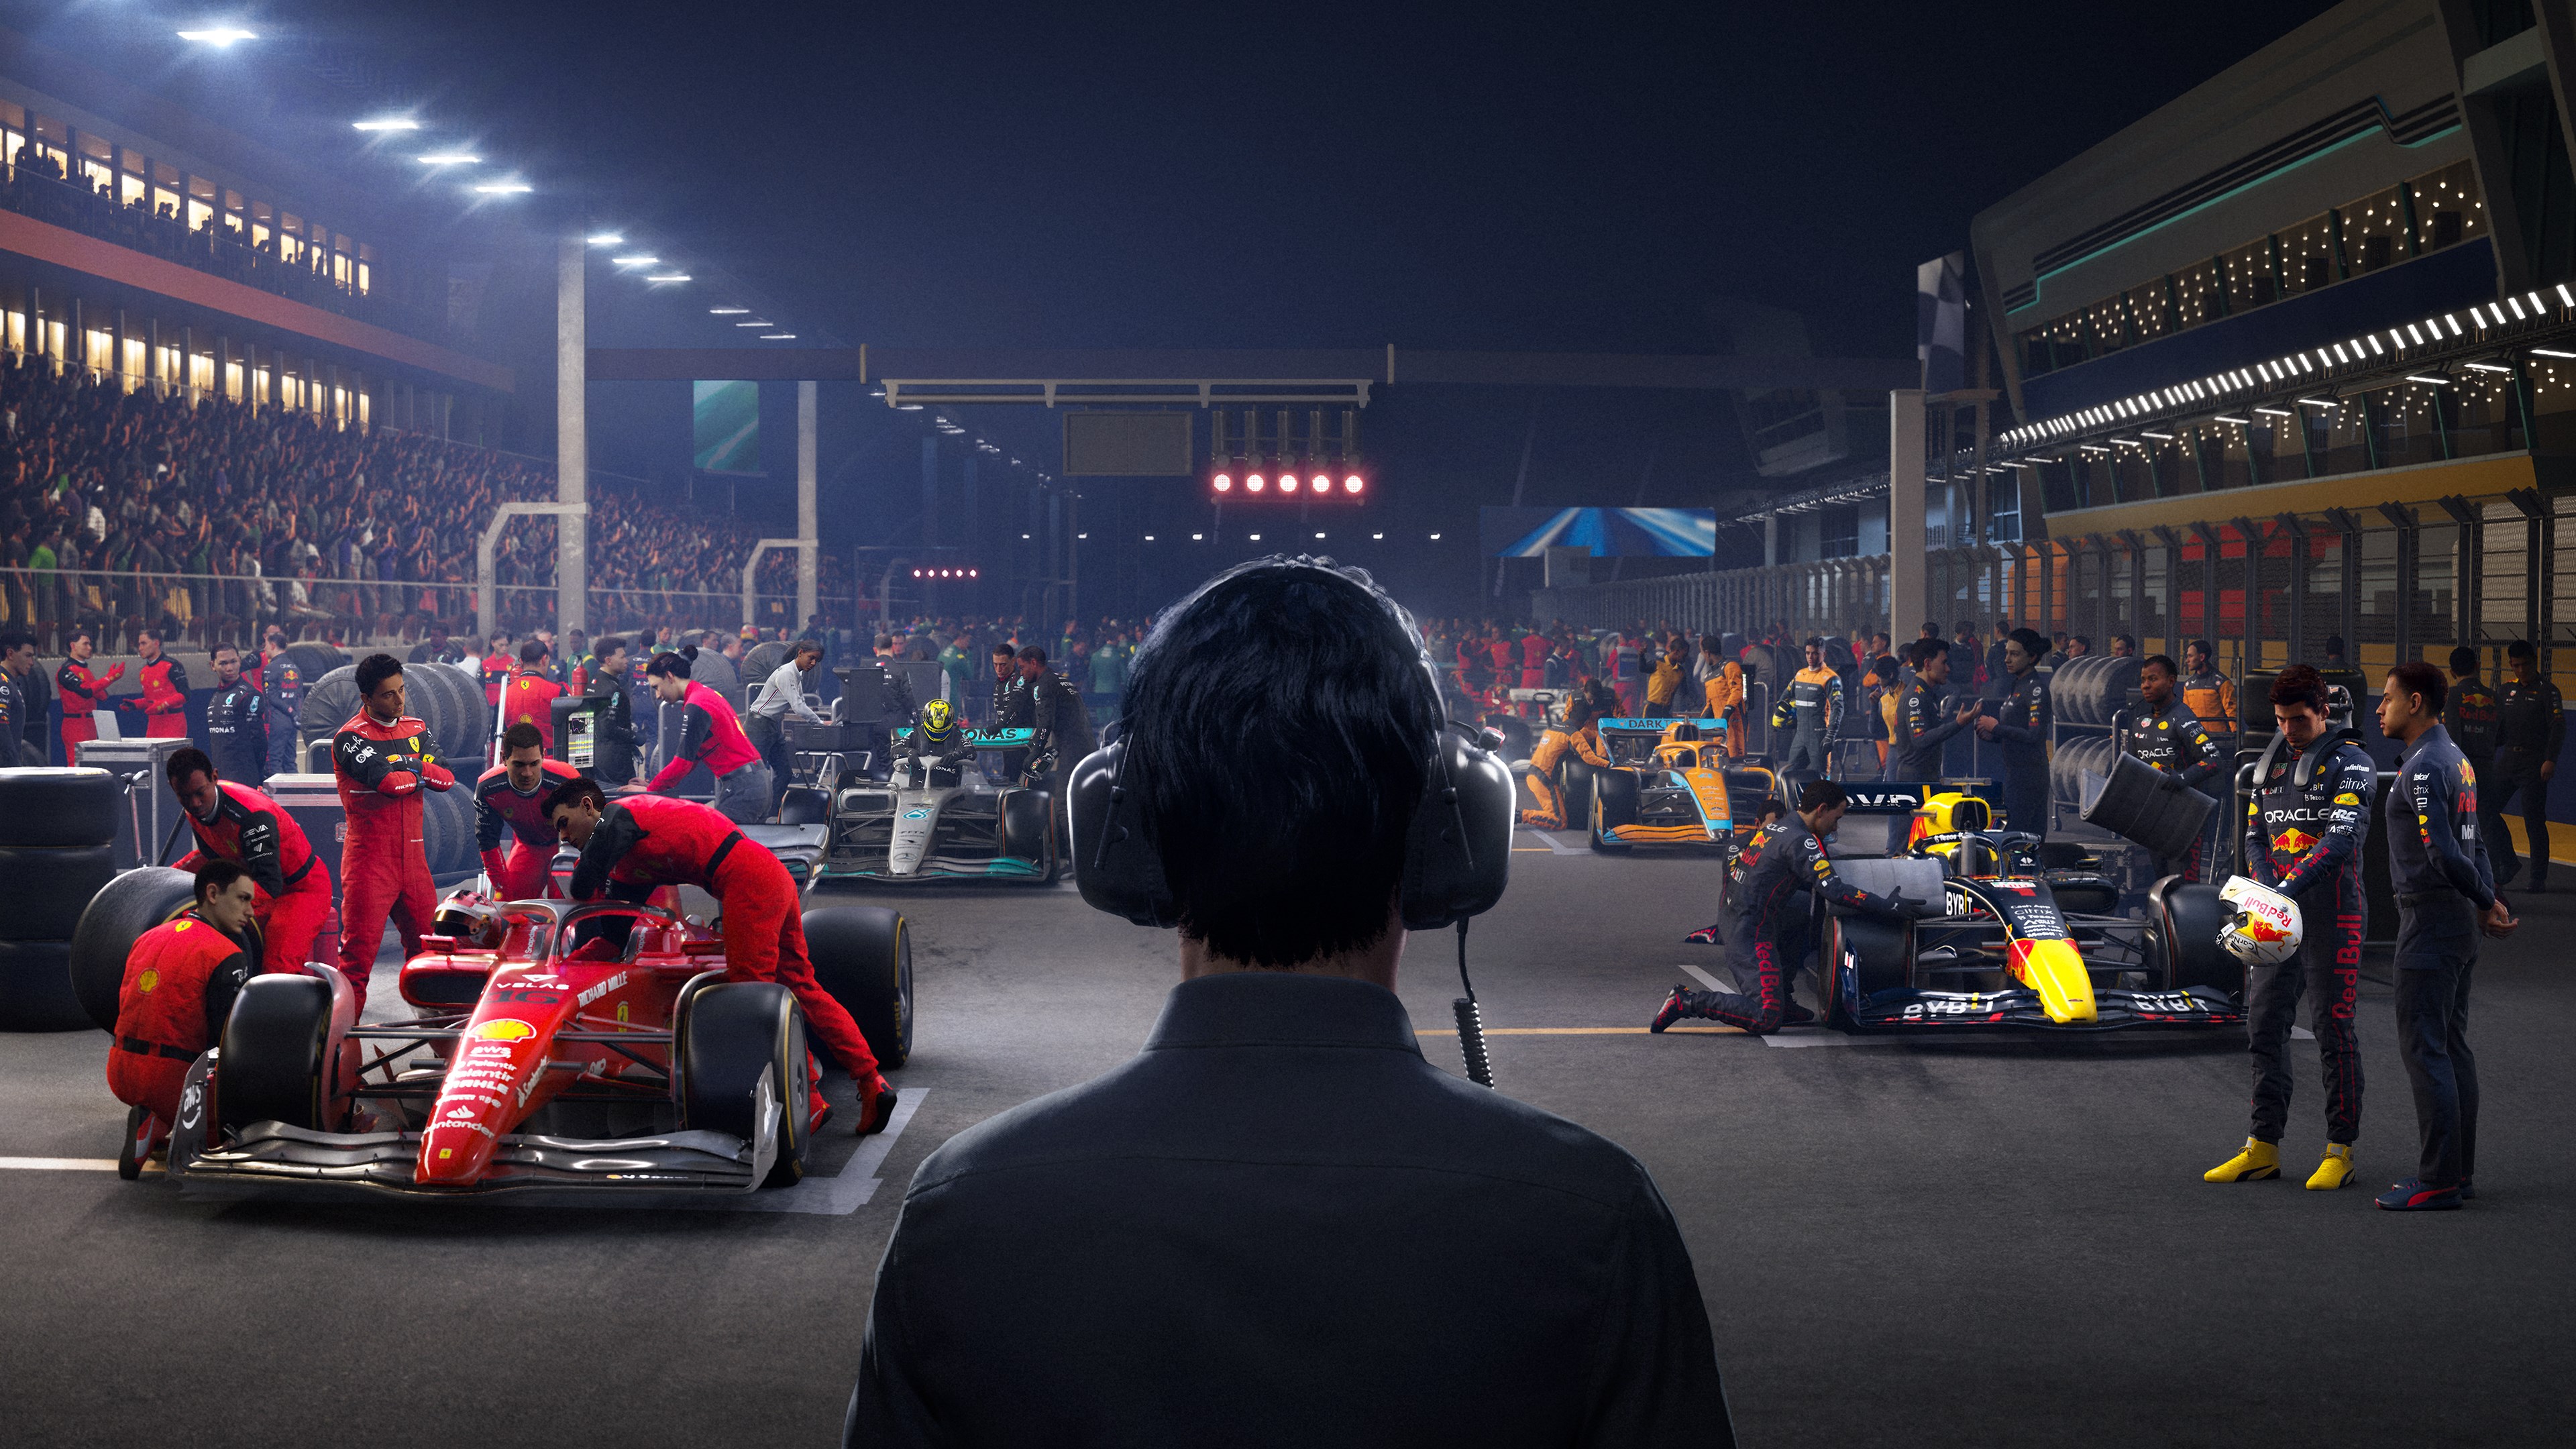 F1 manager download